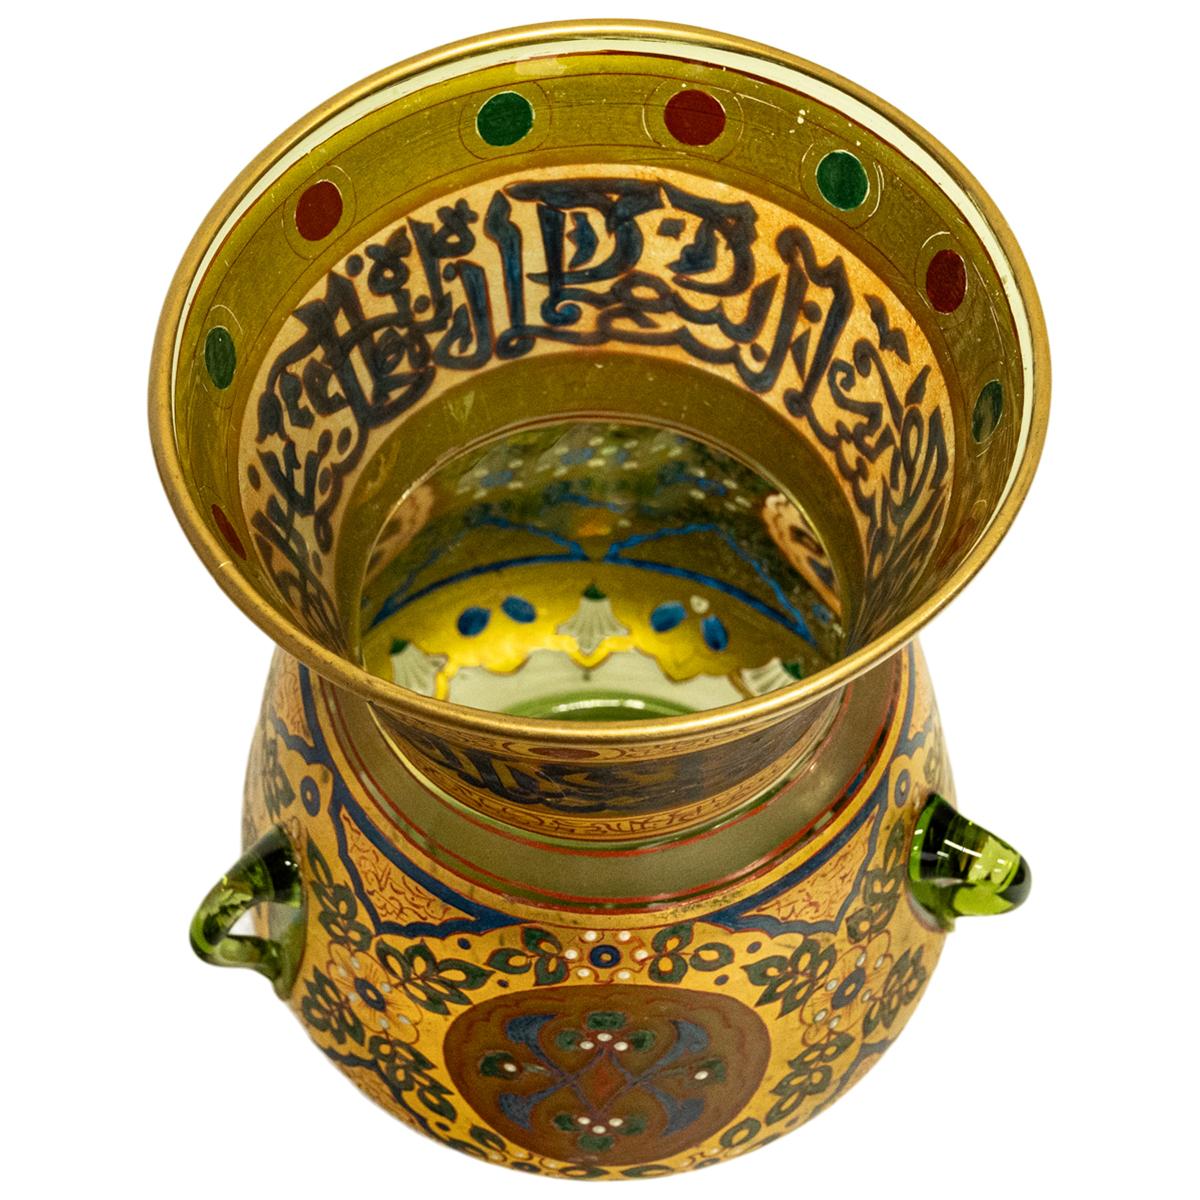 Antique French Islamic Glass Enamel Gilt Mamluk Revival Mosque Lamp Brocard 1880 For Sale 11